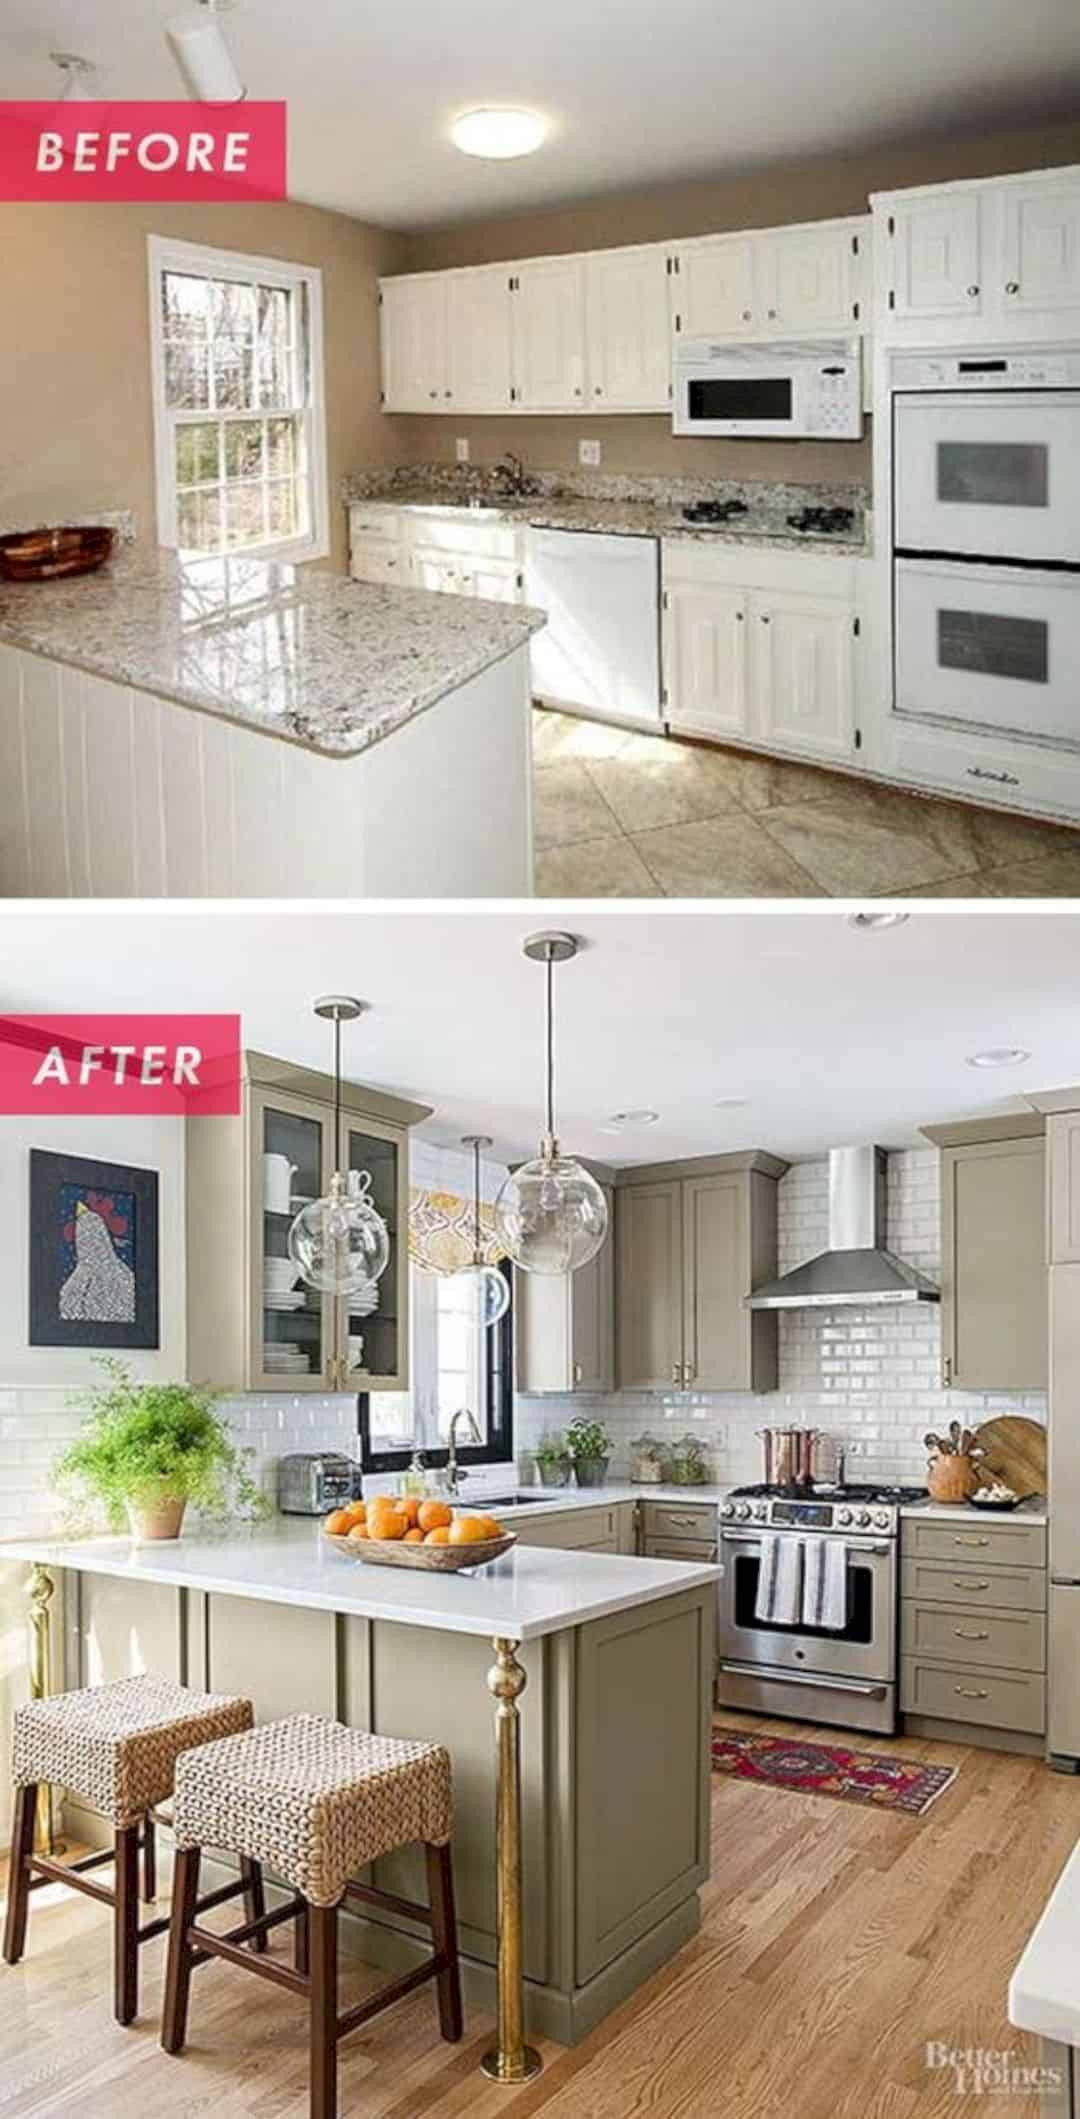 Small Kitchen Makeover Ideas
 15 Clever Renovation Ideas to Update Your Small Kitchen